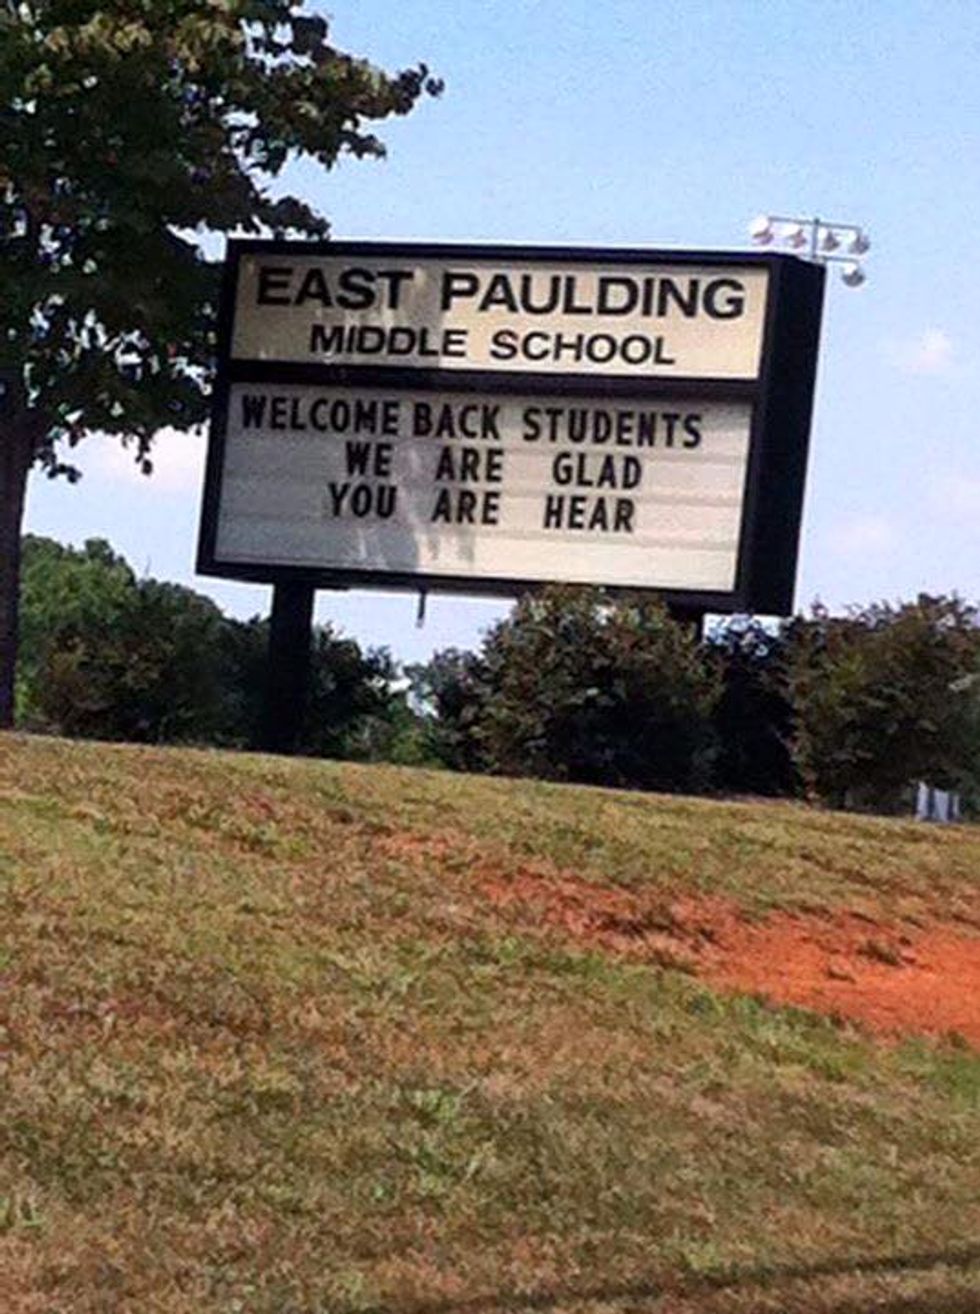 Can You Spot the 'Unfortunate' Spelling Error in Sign That Middle School Officials Missed?